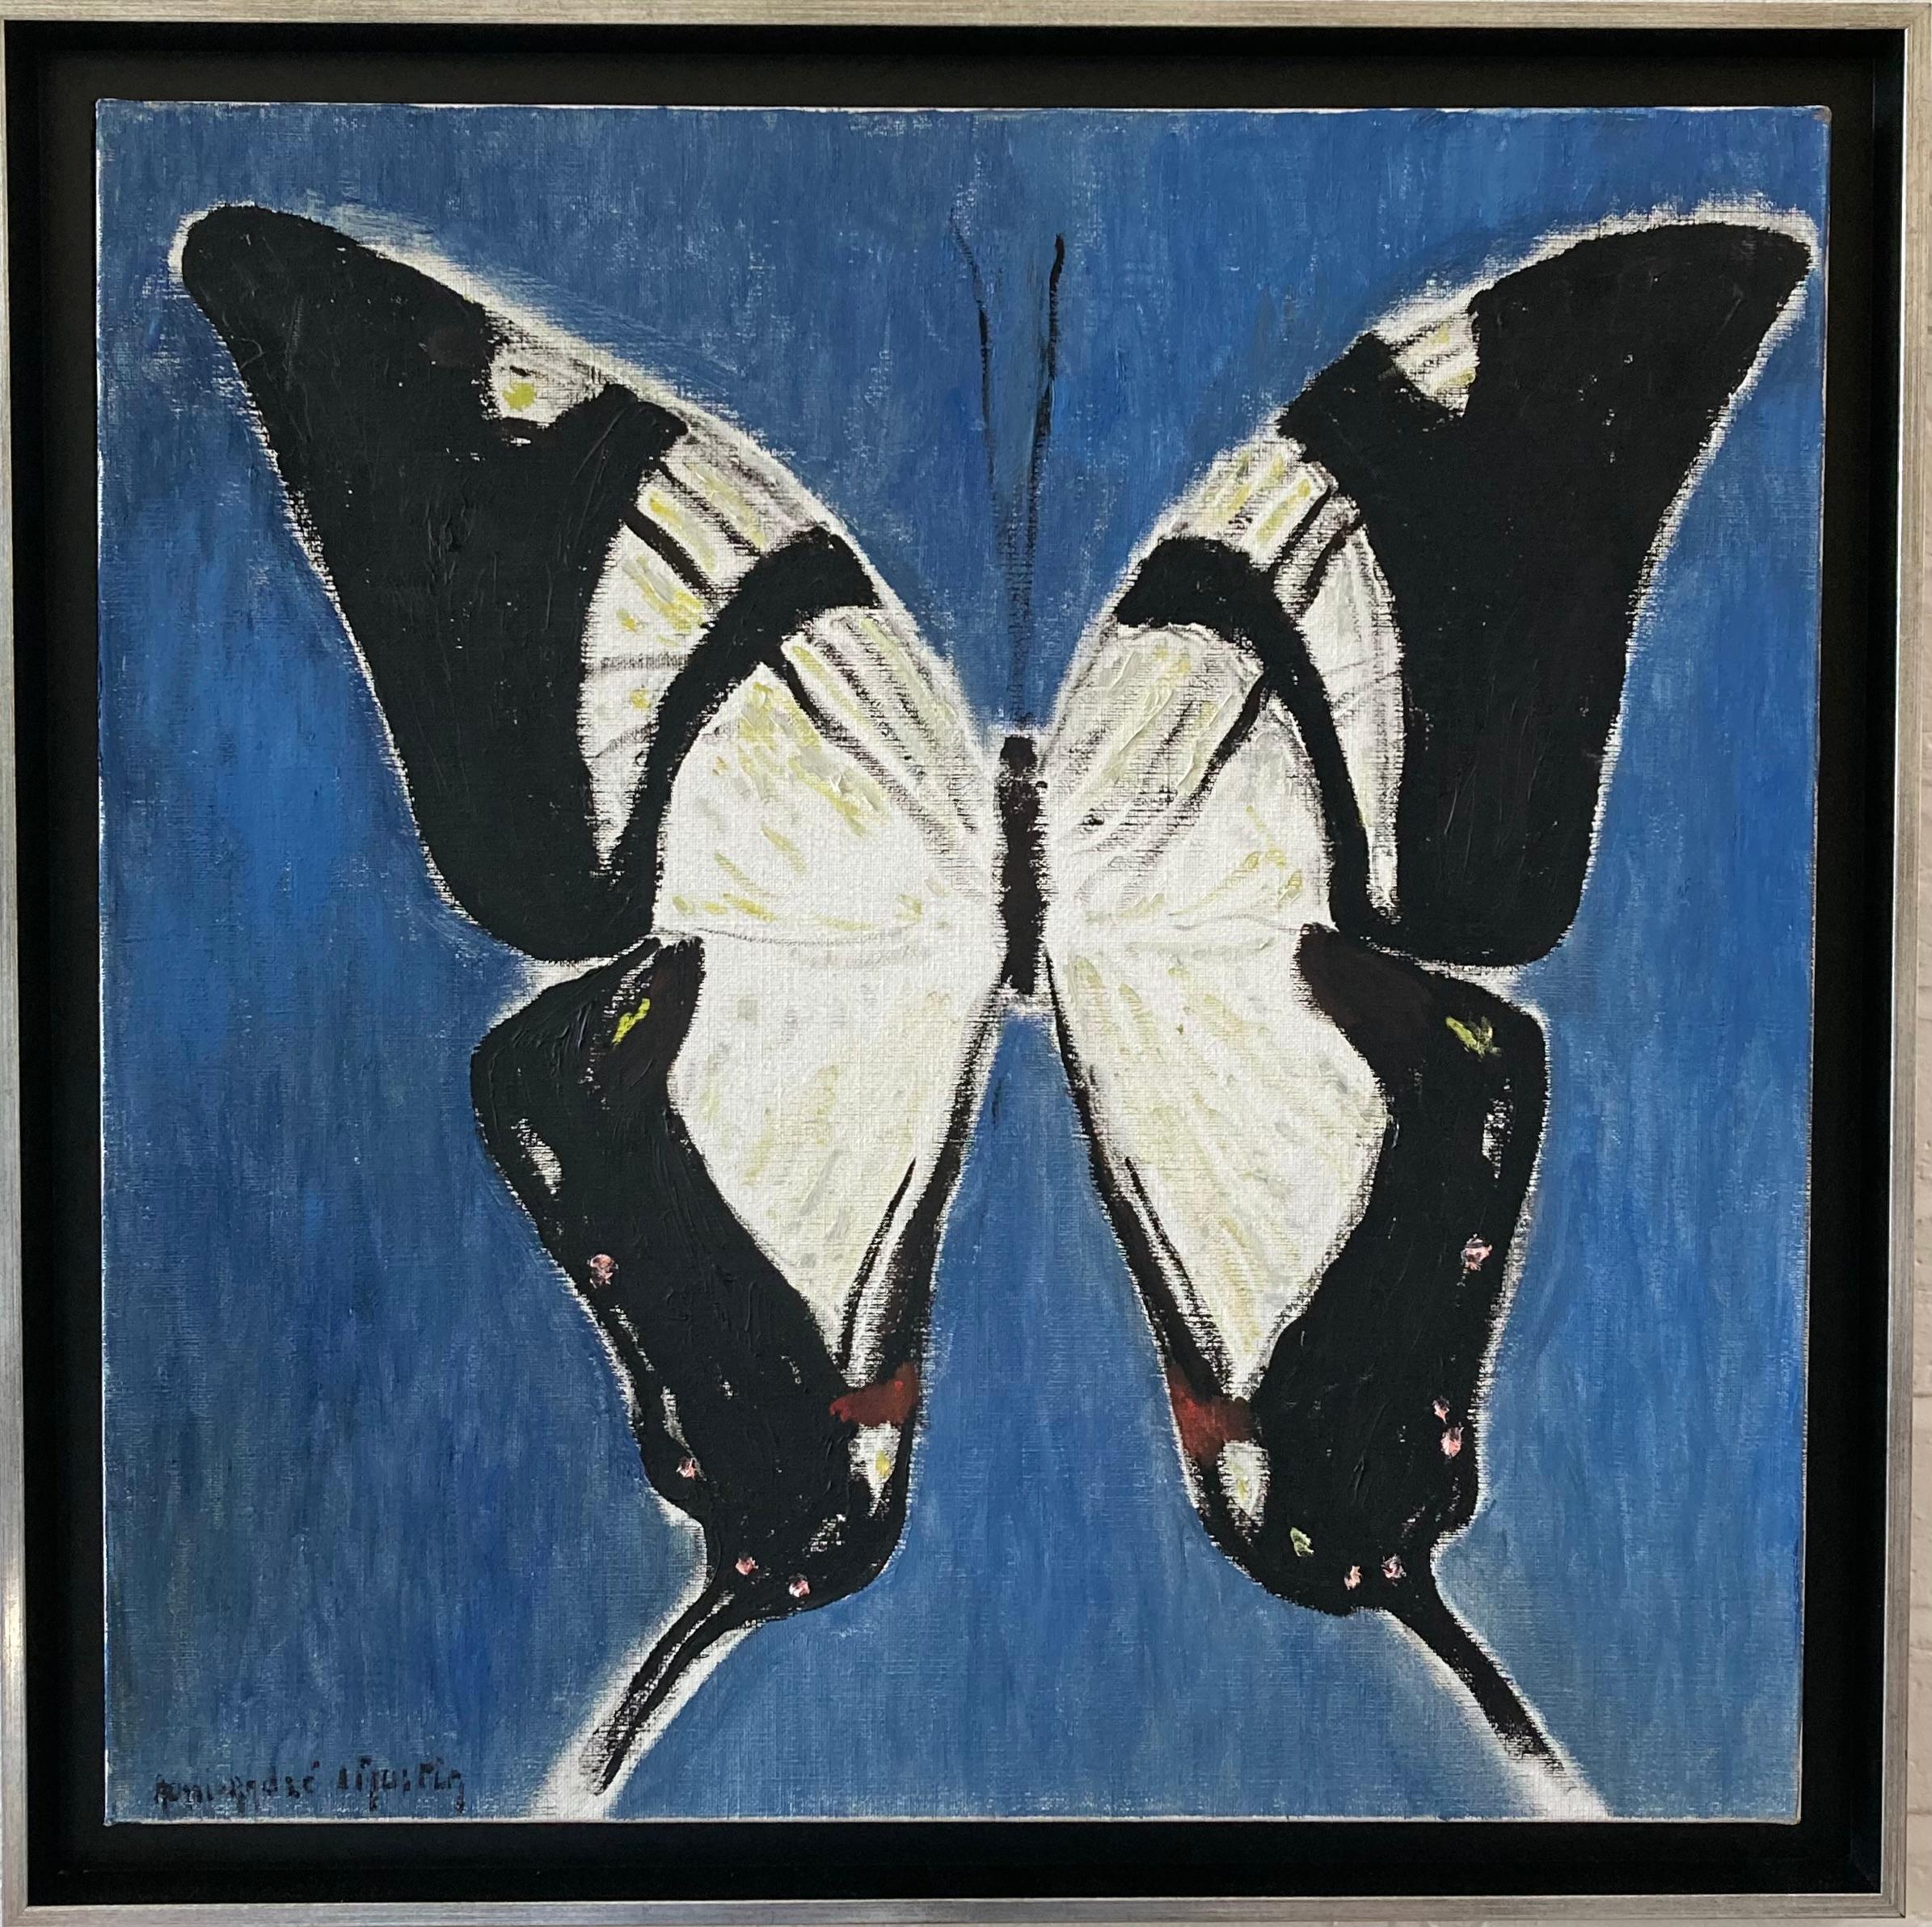 An incredibly striking image of a Swallowtail butterfly. Painted with great energy and style. This would look stunning against a white wall.

Henri-André Martin (1918-2004)
A Swallowtail butterfly
Signed
Oil on canvas
23½ x 23½ inches excluding